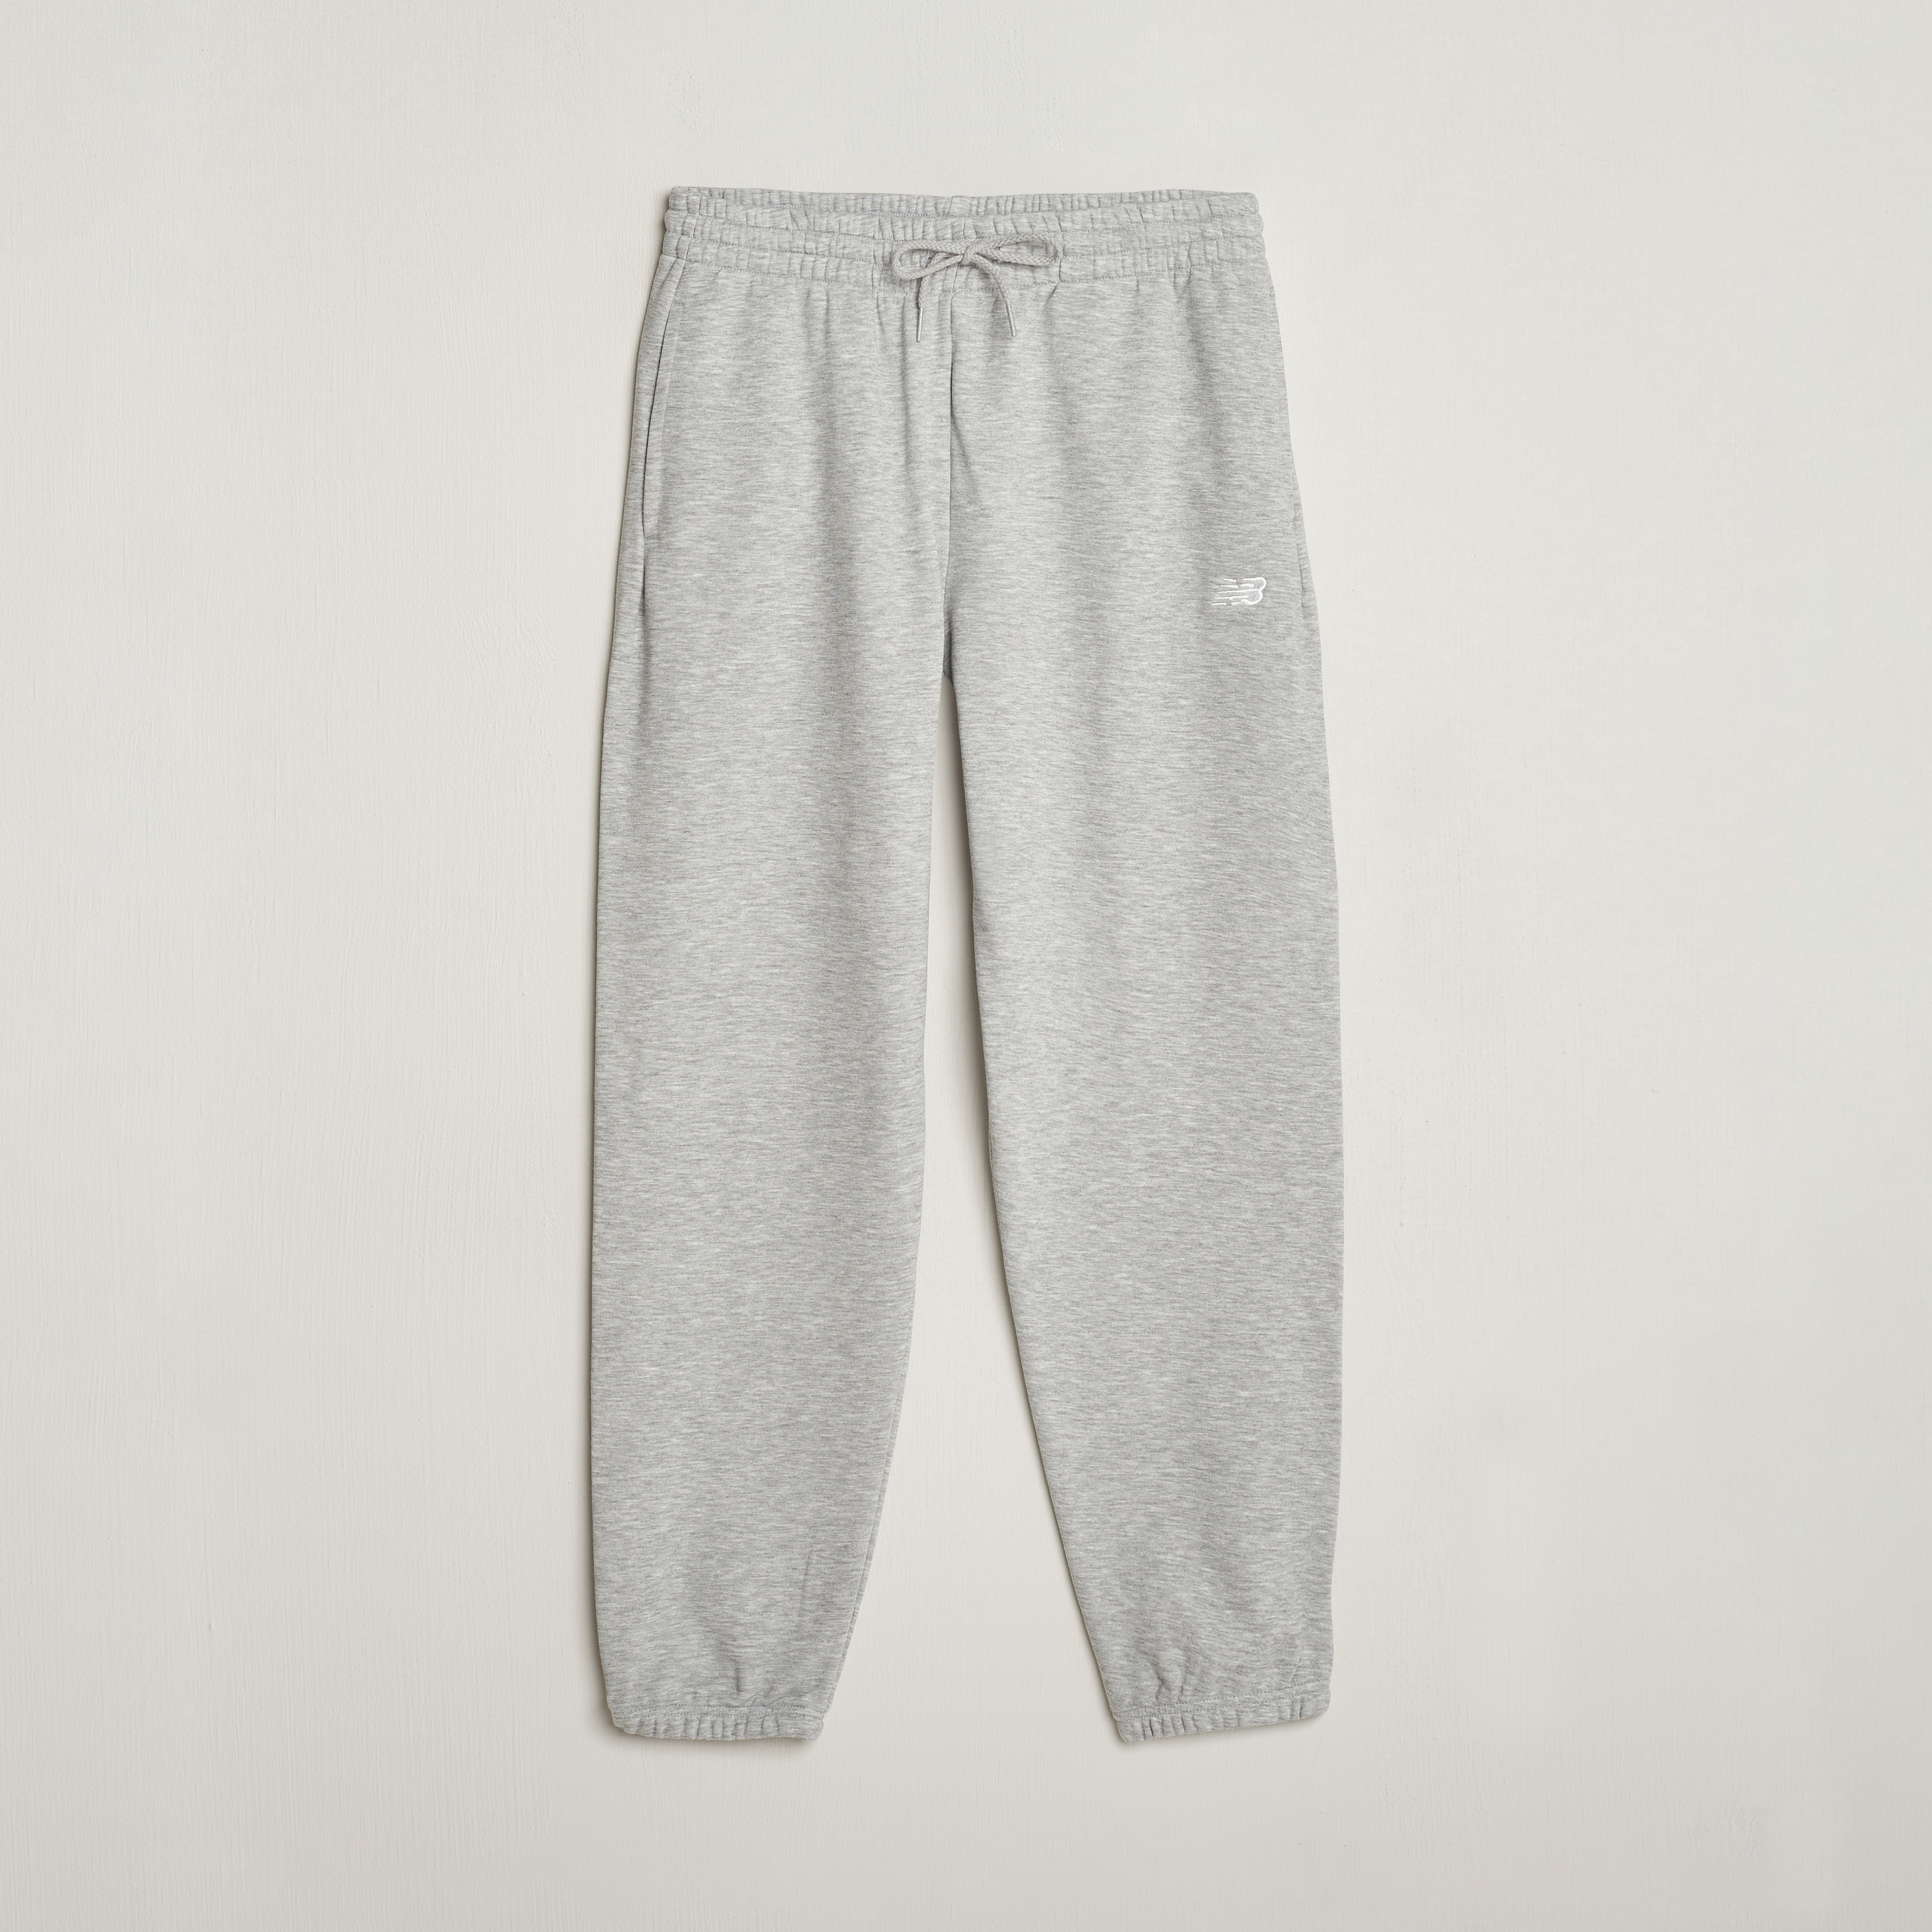 New Balance Essentials French Terry Sweatpants Athletic Grey at CareOfCarl.